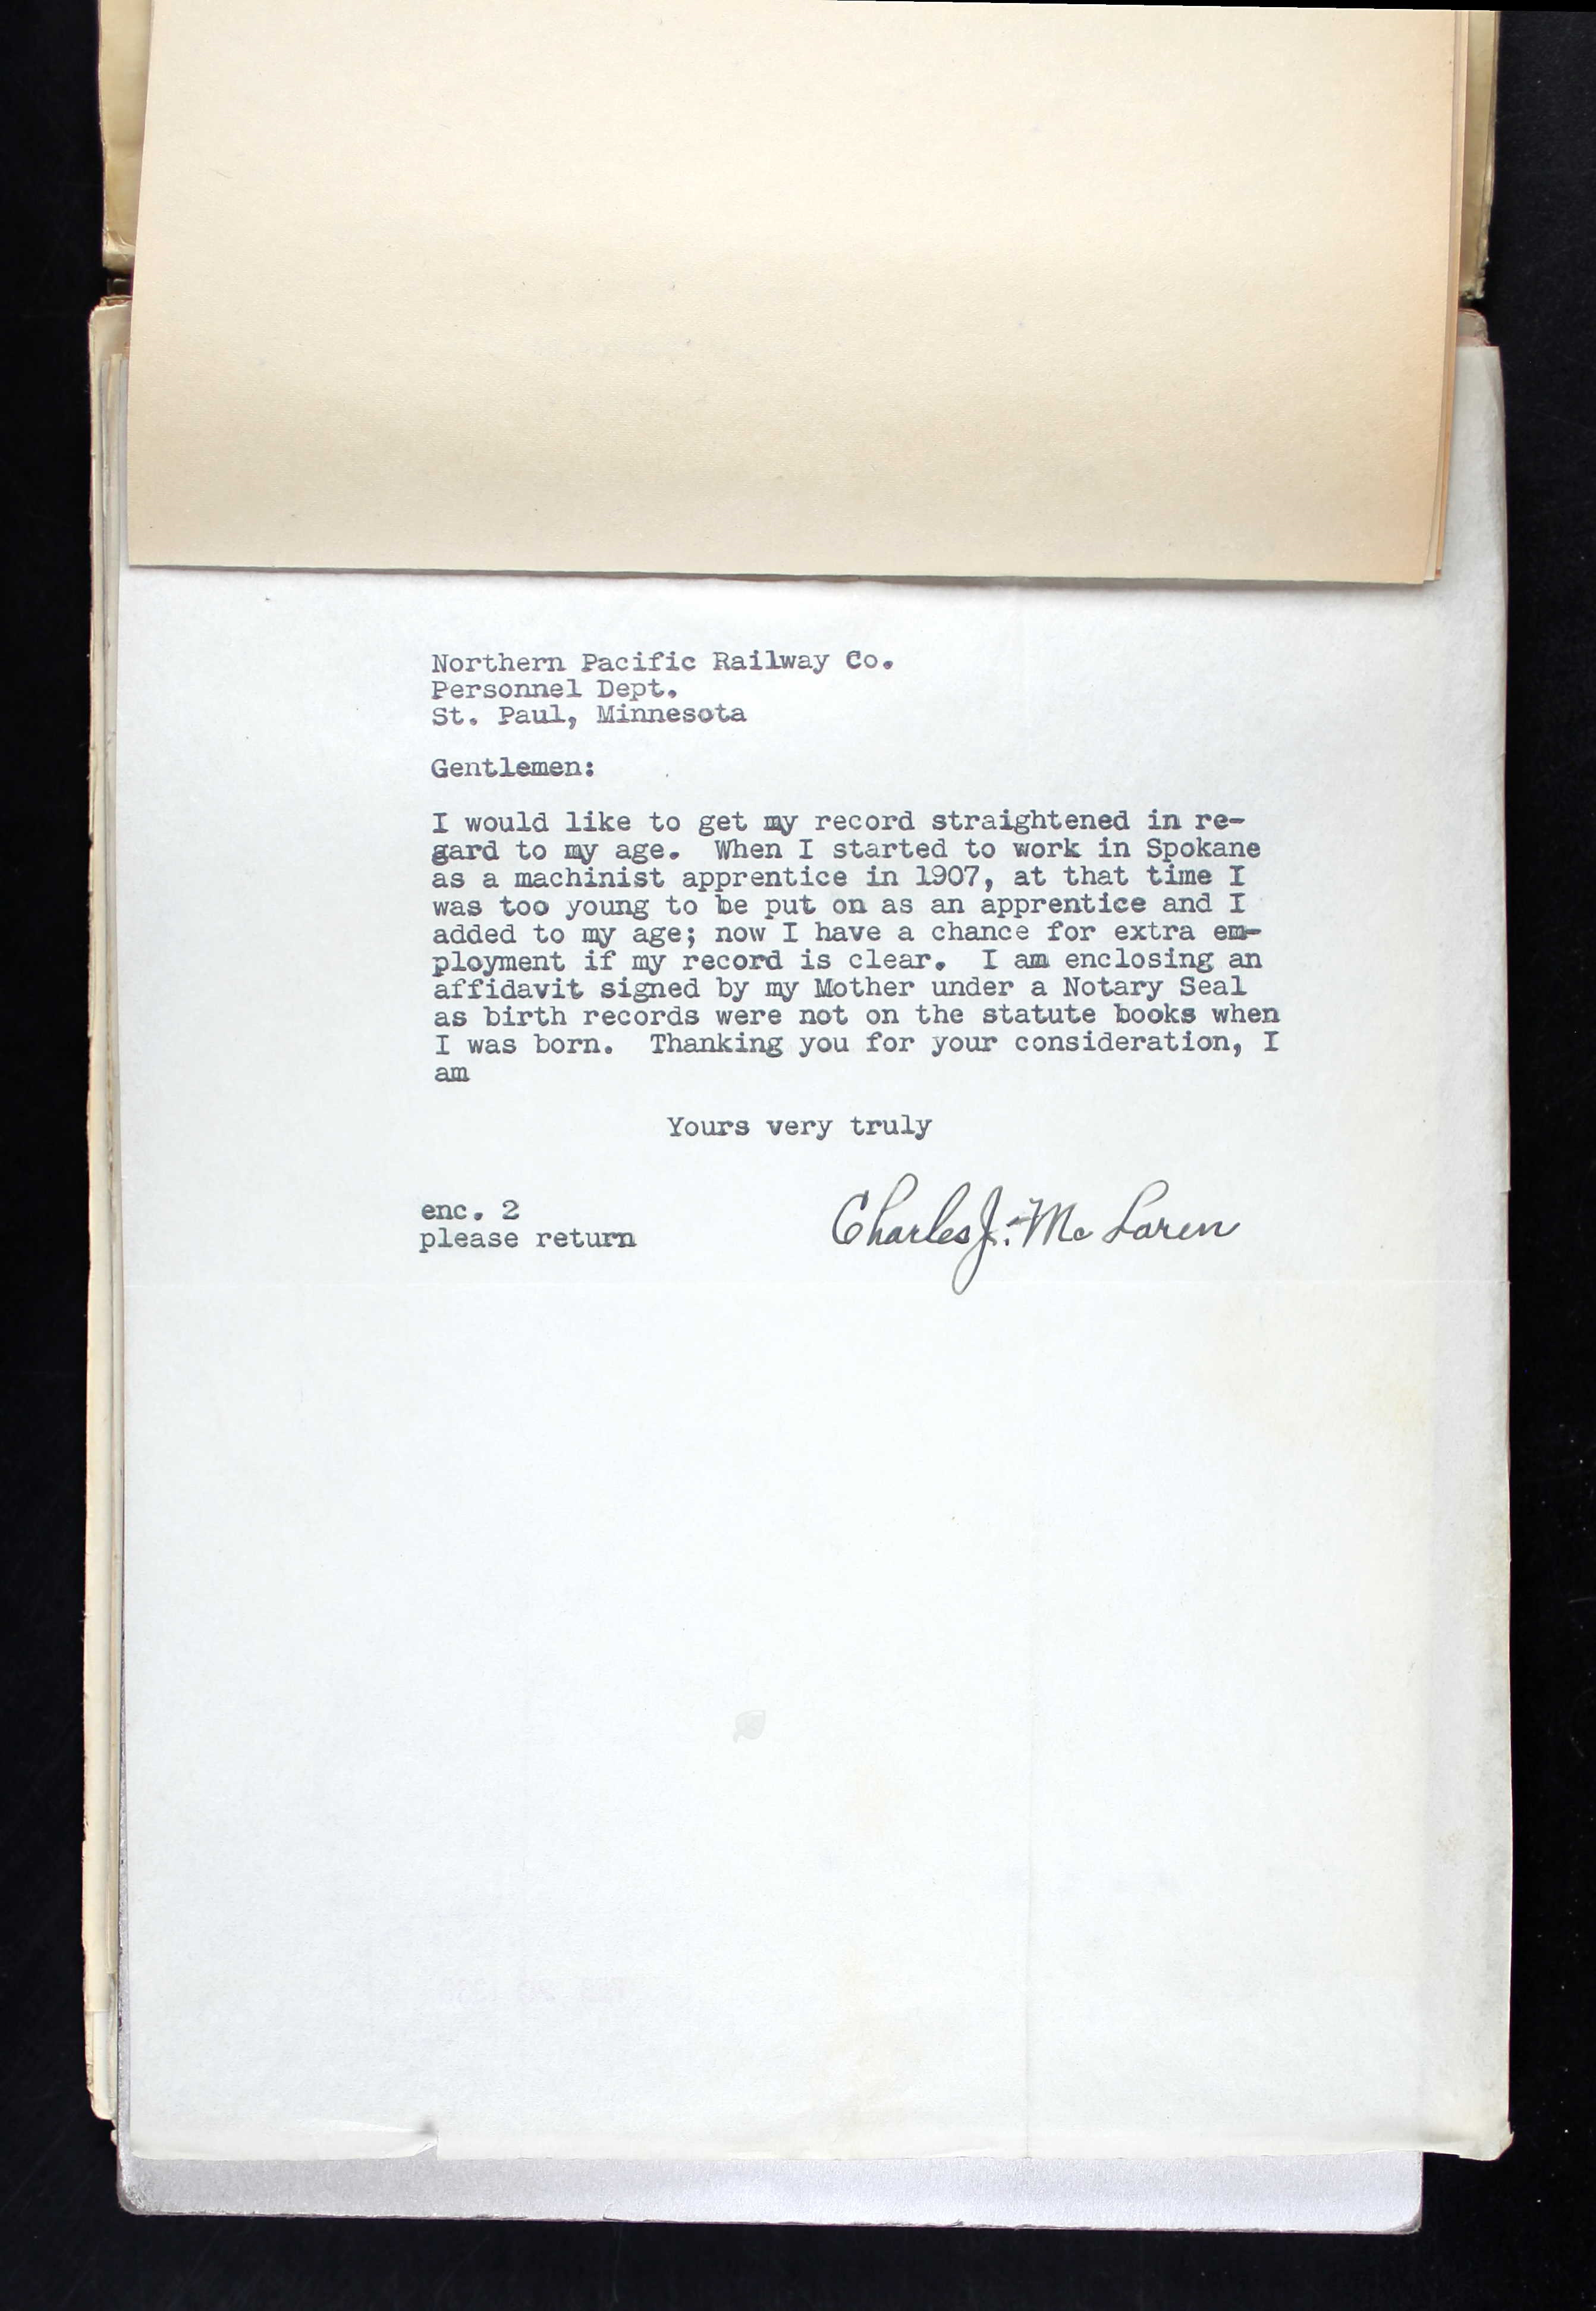 Letter to Northern Pacific Railway Company by Charles McLaren